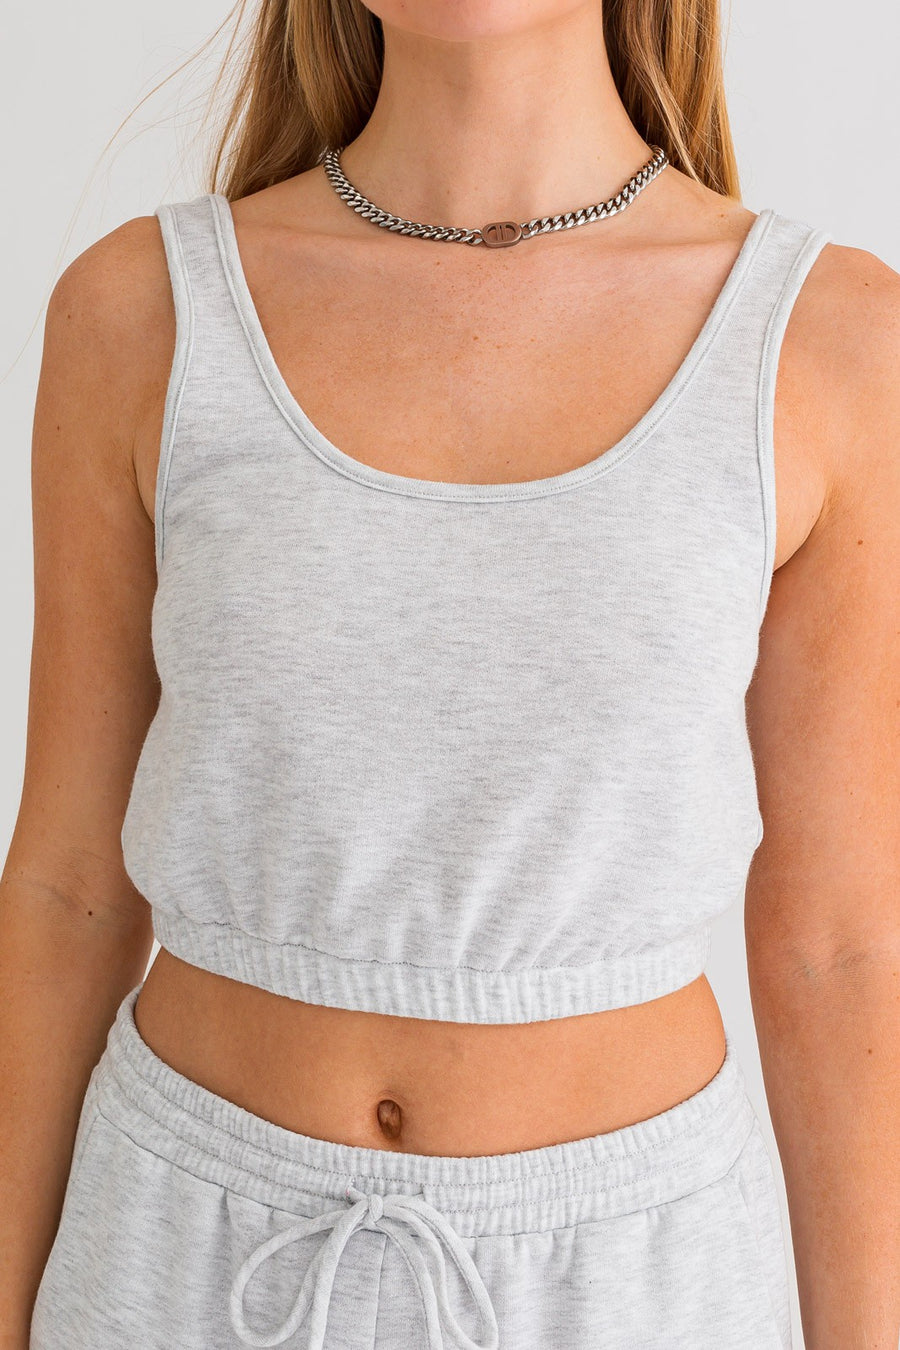 Cropped tank top with waistband in the color heather grey.